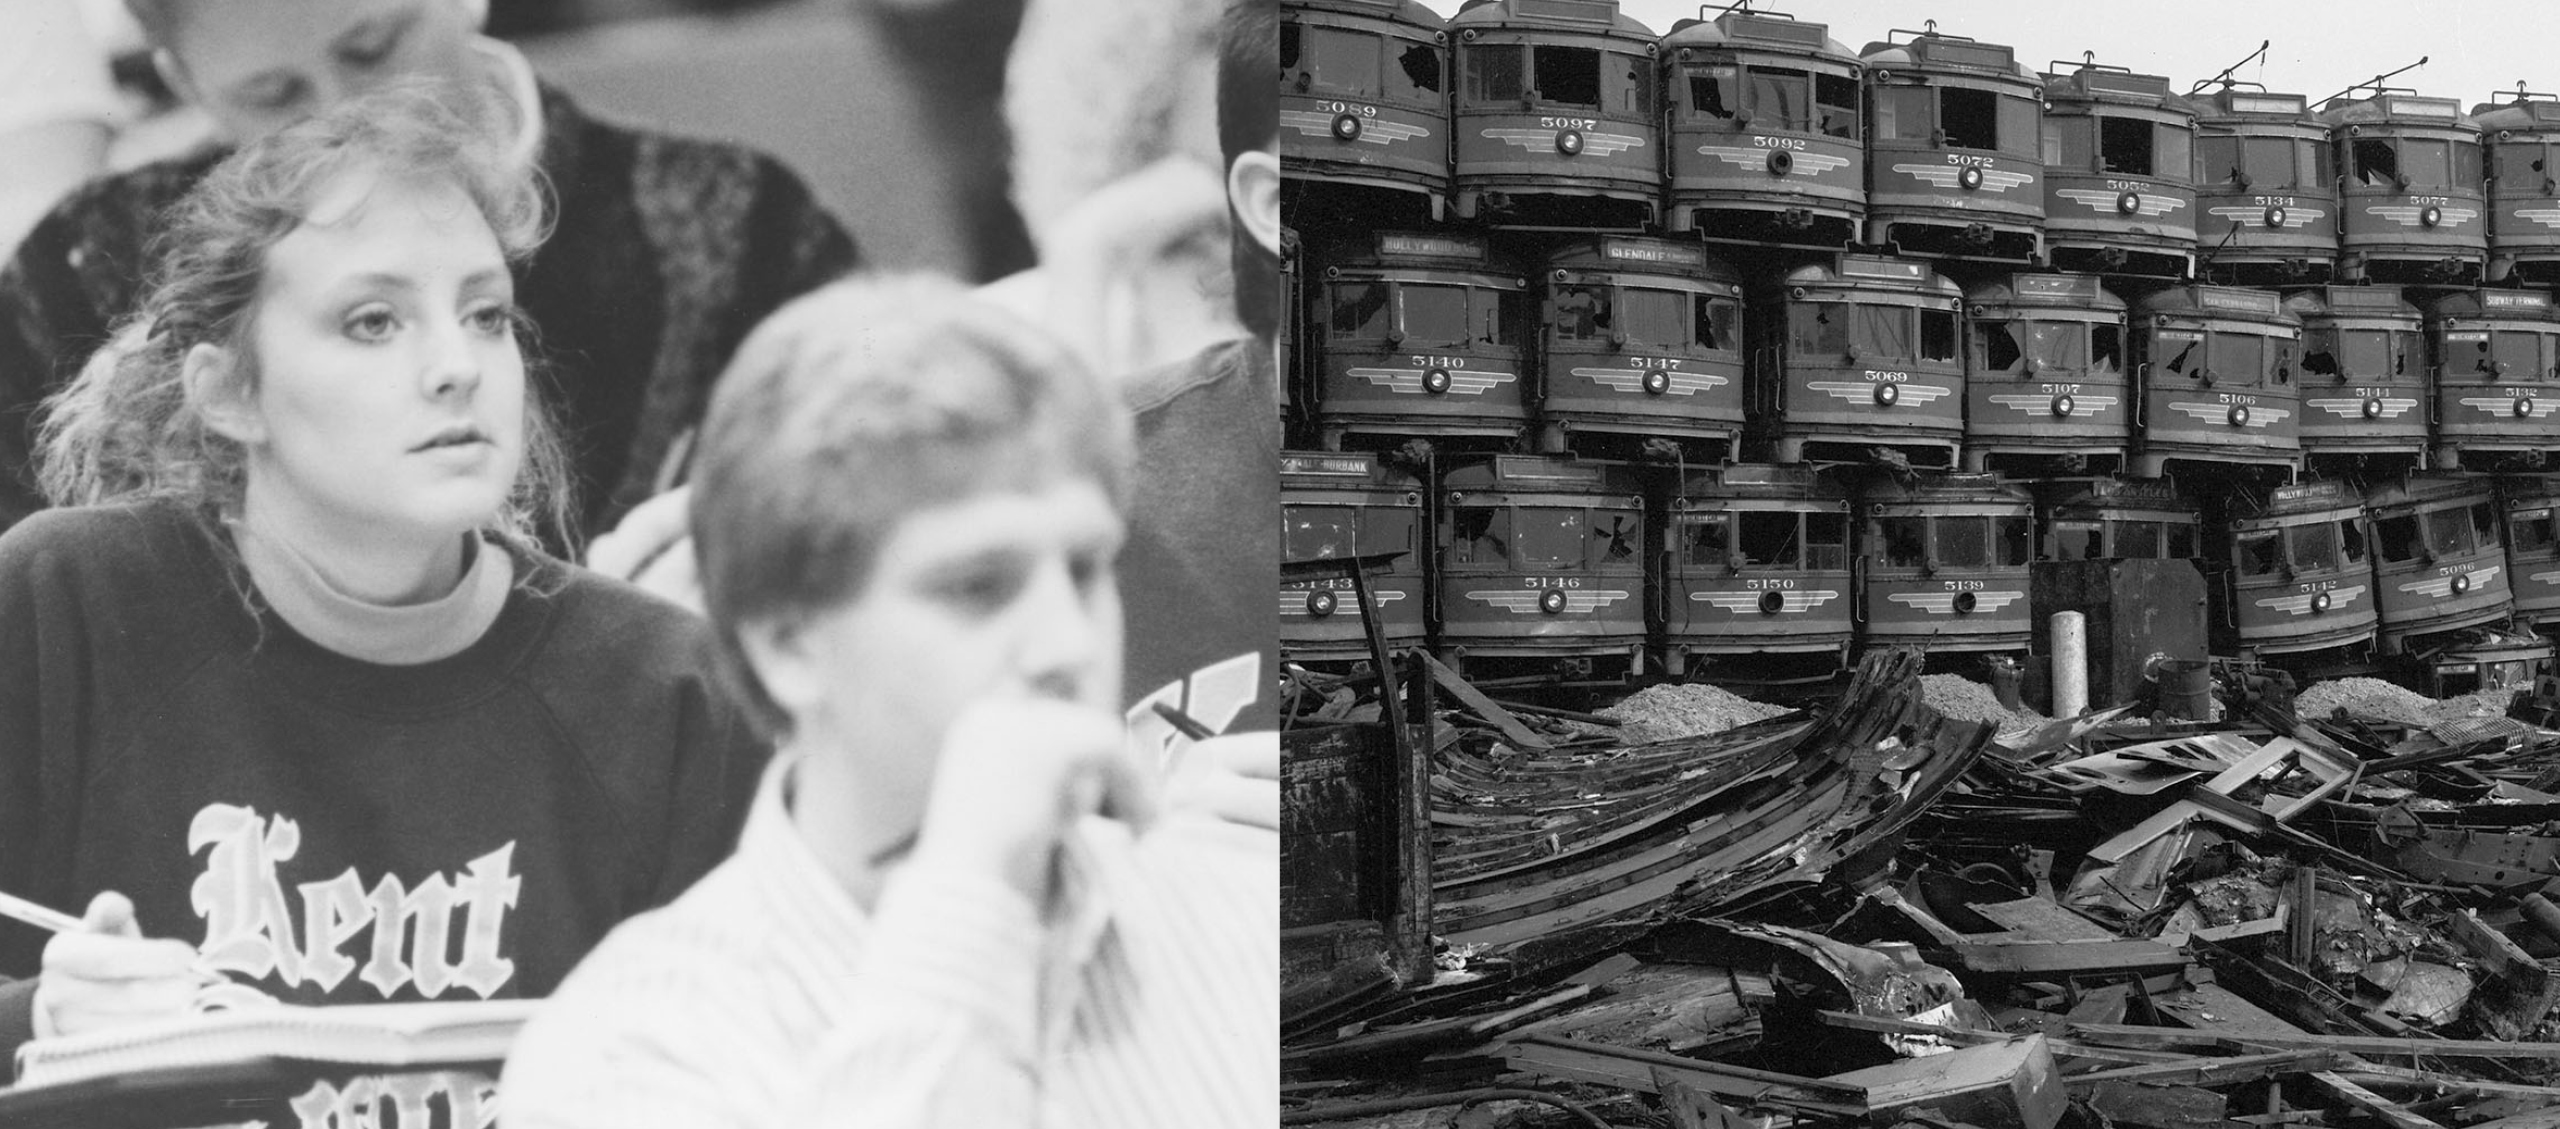 On the left is a black-and-white photo of a student taking notes in class. On the right is a black-and-white photo of street cars stacked on each other.